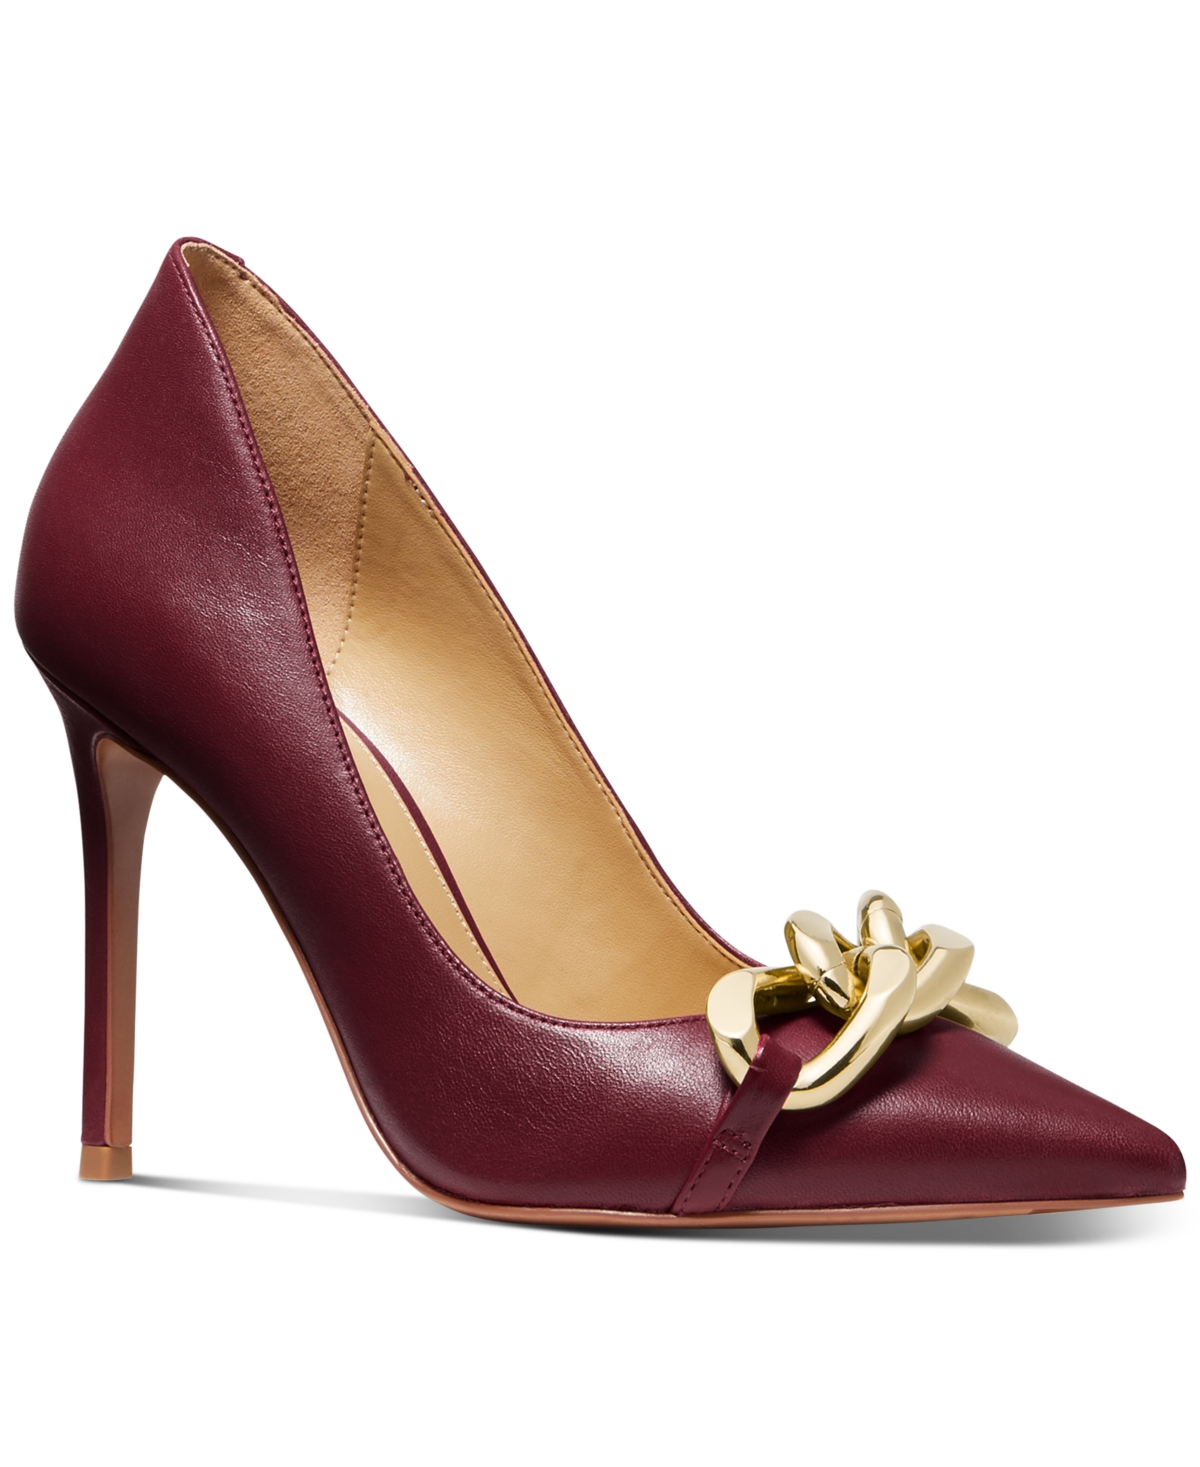 UPC 195512620911 product image for Michael Michael Kors Women's Scarlett Pointed-Toe Chain Pumps Women's Shoes | upcitemdb.com